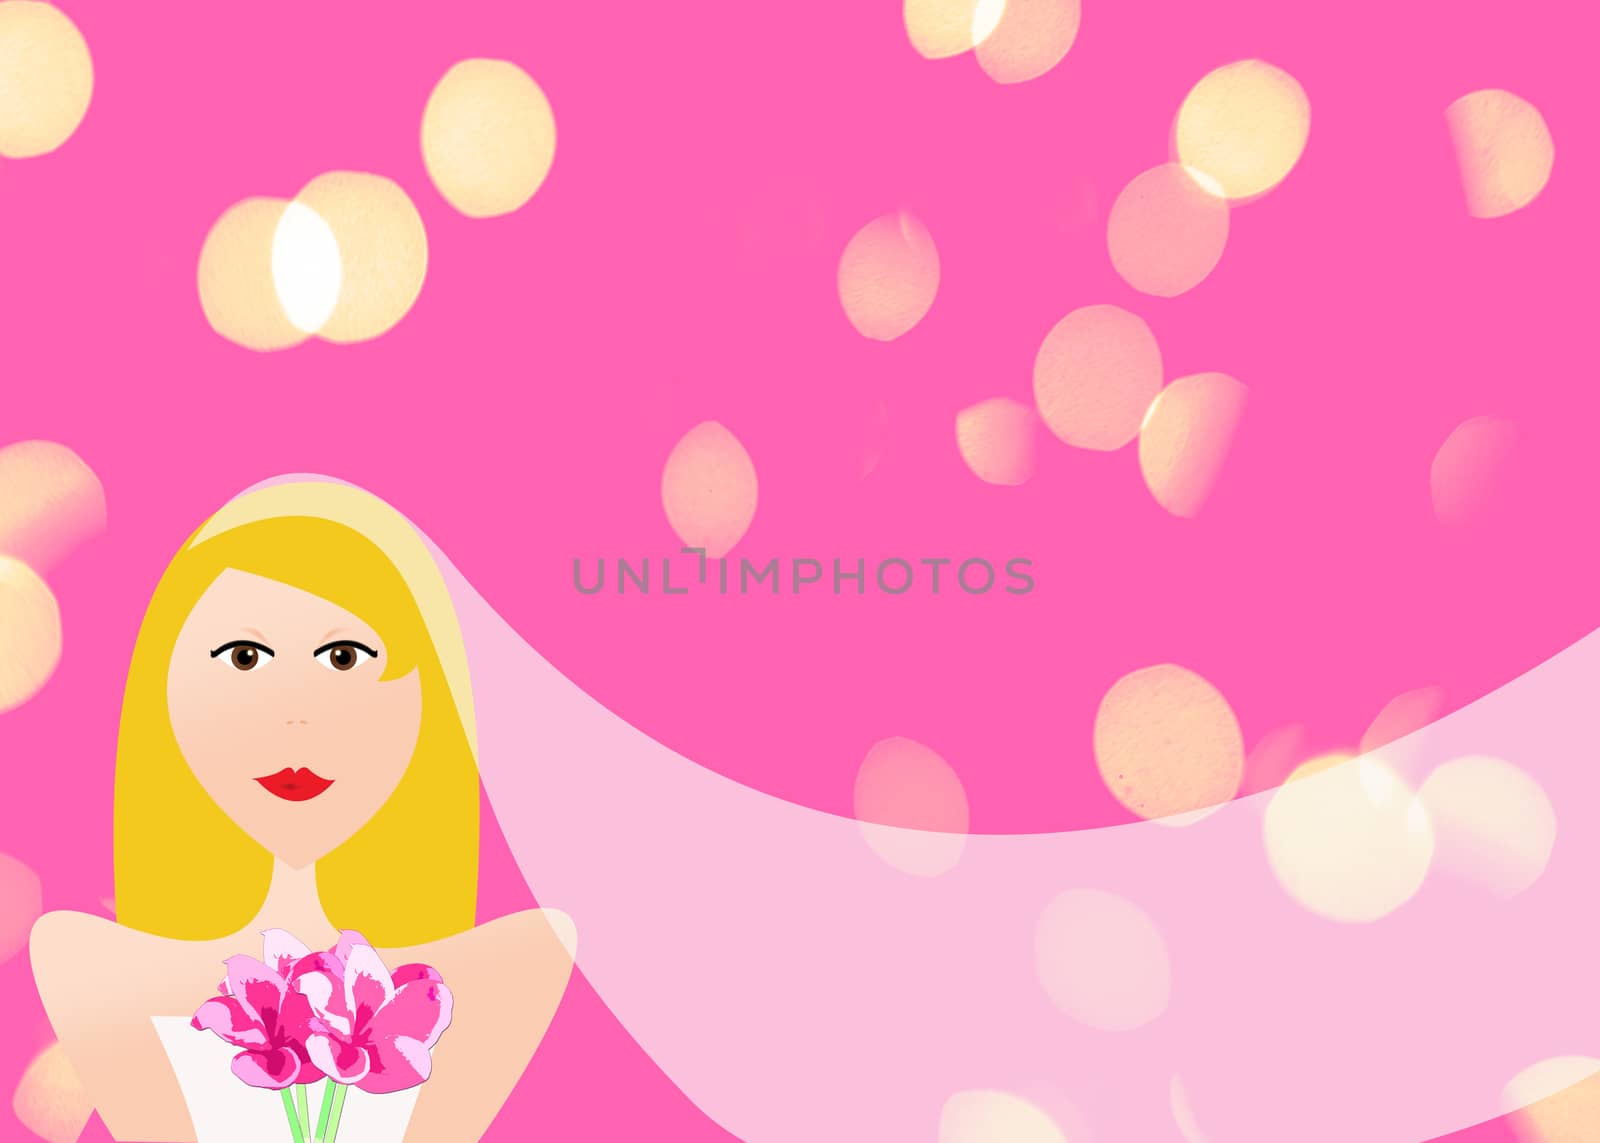 blonde bride illustration in wedding dress with pink background by ftlaudgirl